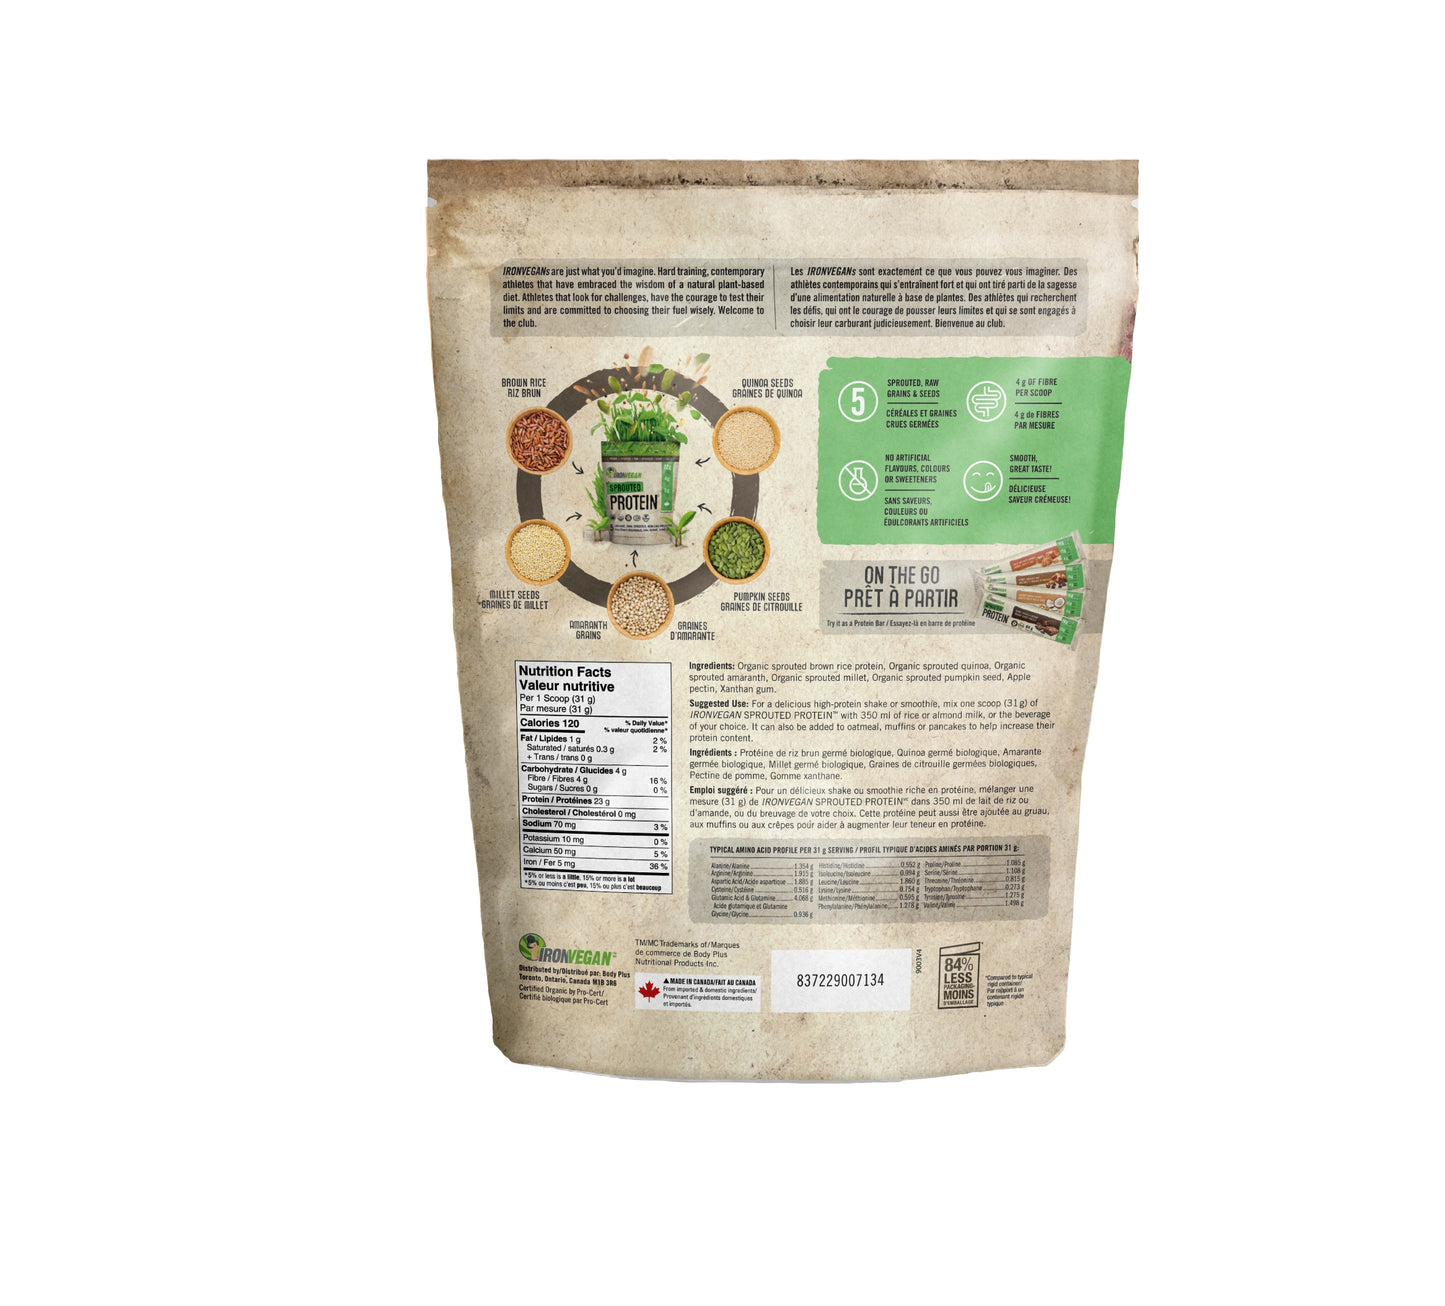 IRON VEGAN Sprouted Protein (Unflavoured - 500g)